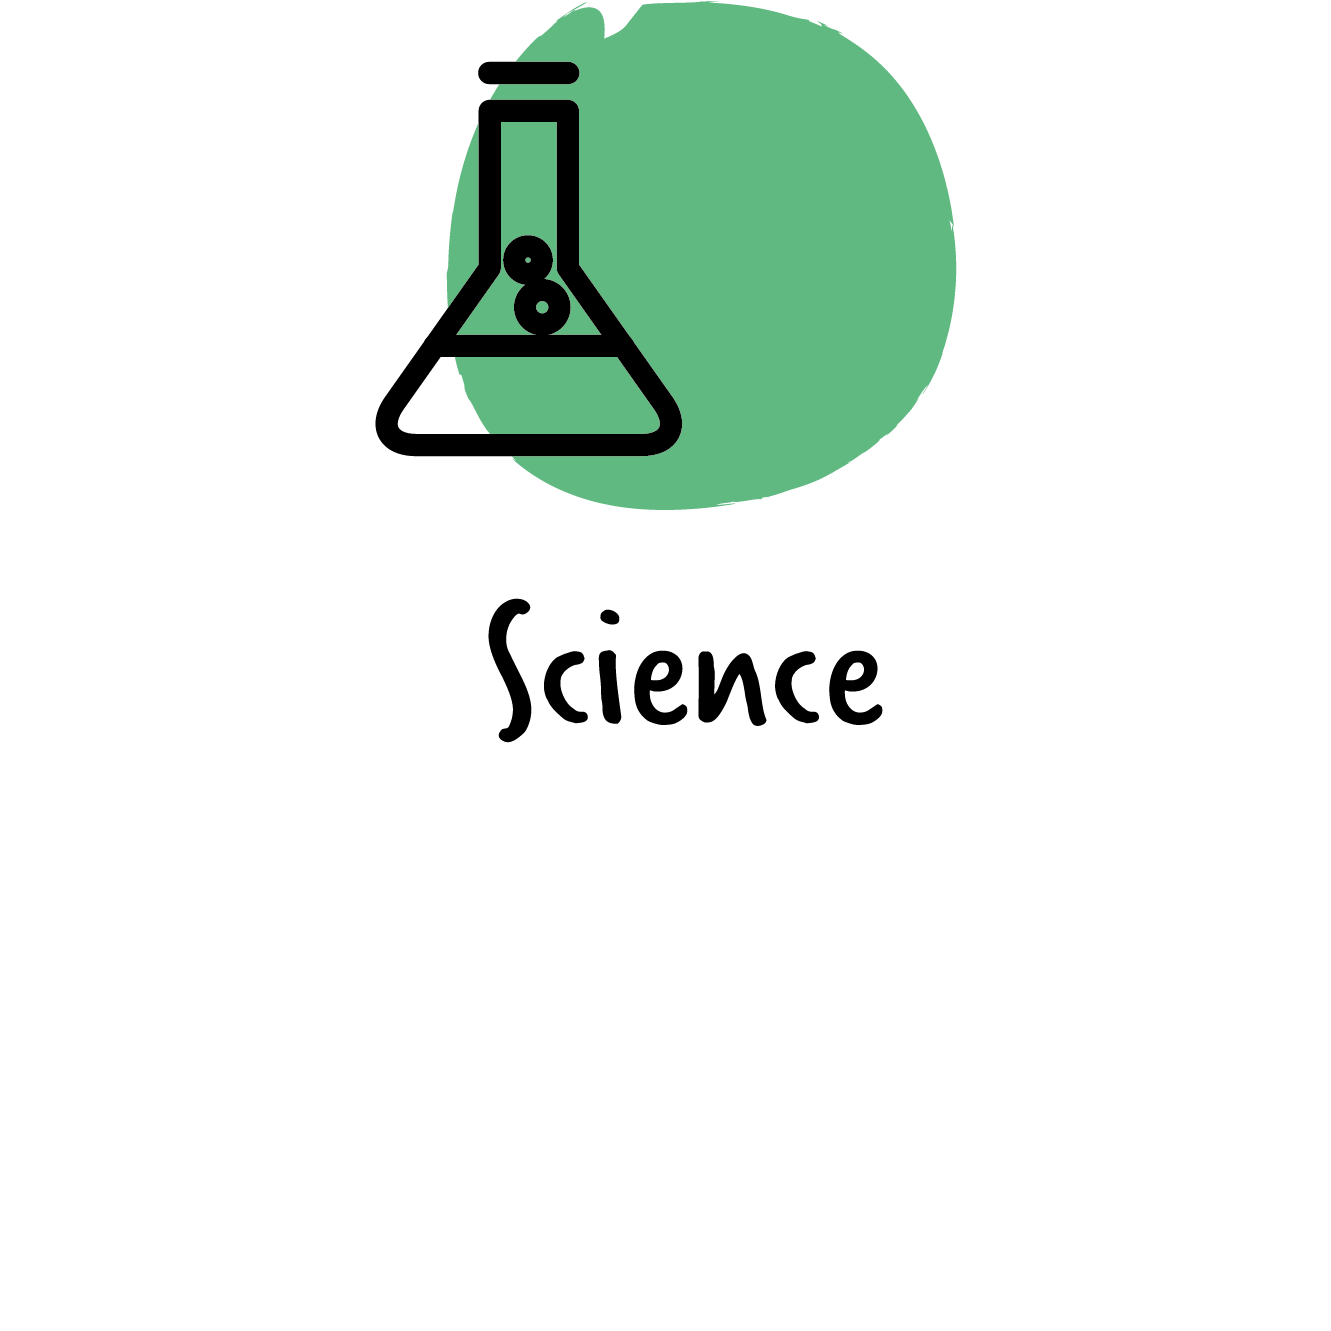 Science_large_Top_Edge.png